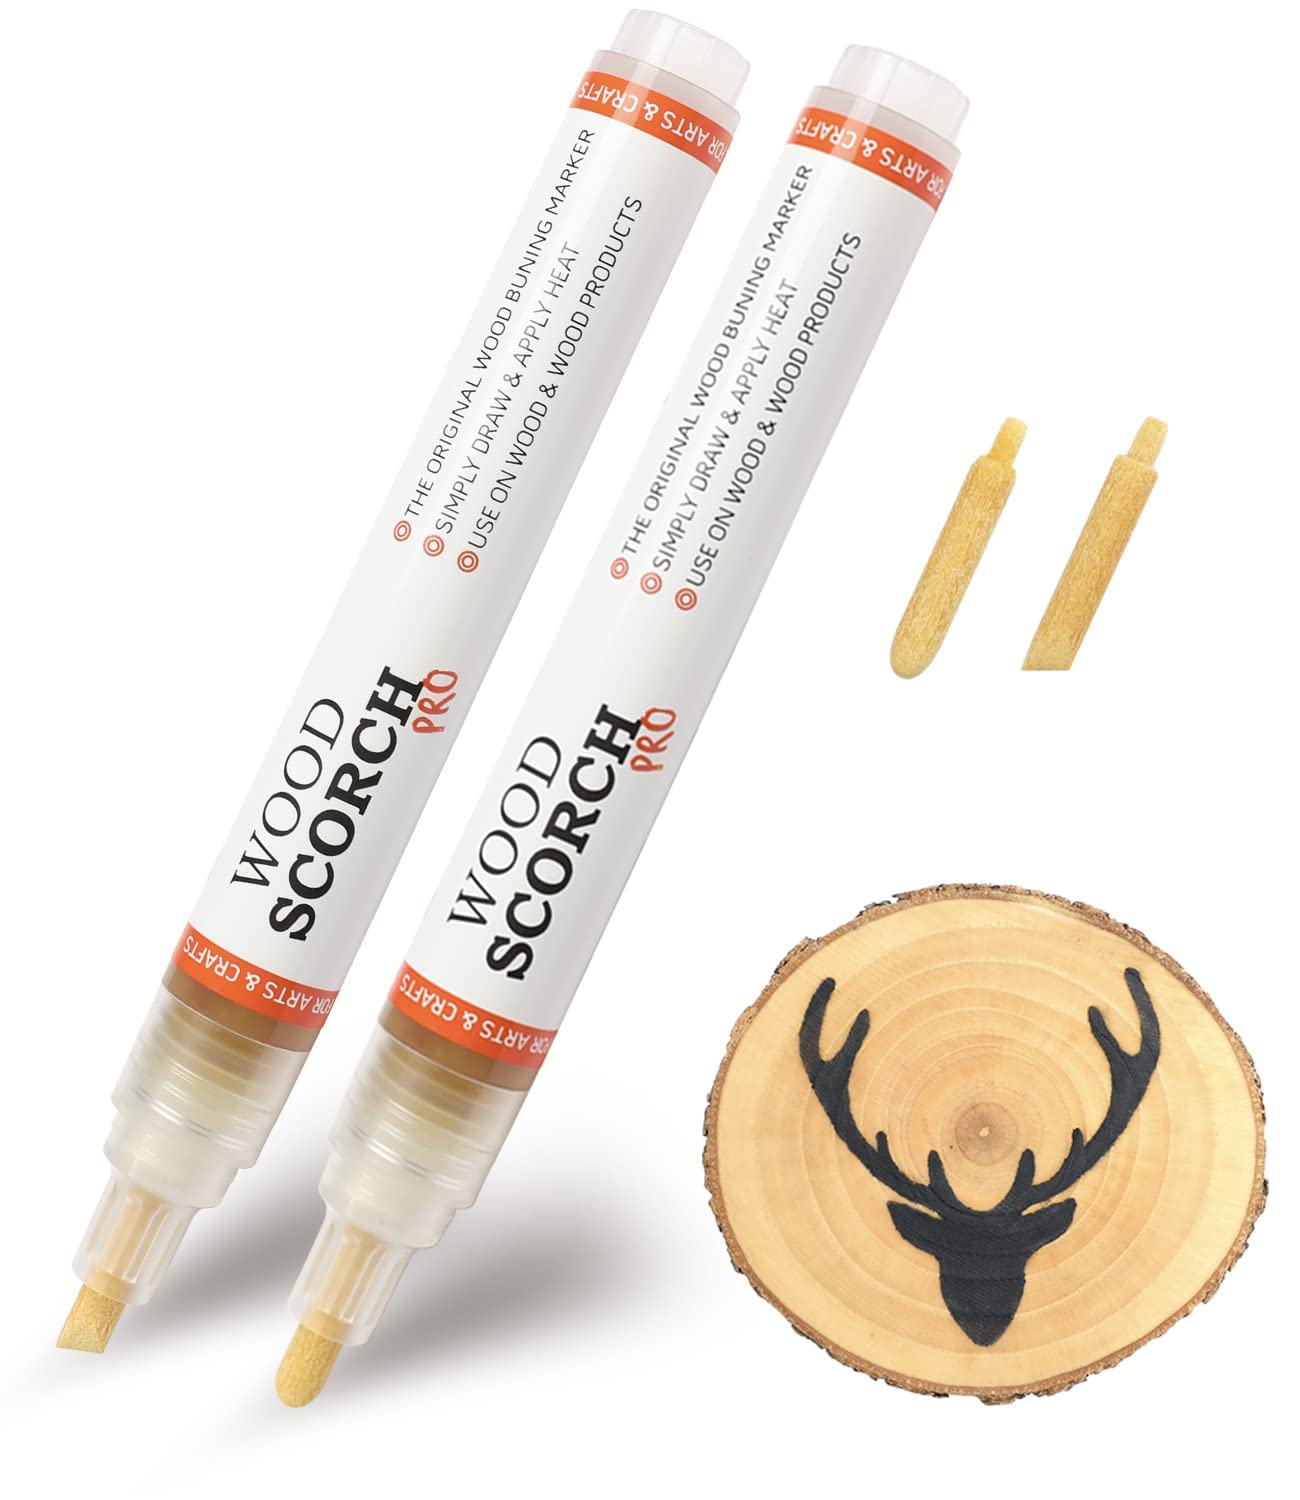 SUIUBUY 2 PCS Chemical Wood Burning Pen Marker, Wood Scorch Pen - Heat  Sensitive Marker for Wood and Crafts - Equipped with Oblique Tip and Bullet  Tip for Easy Use - New Formula